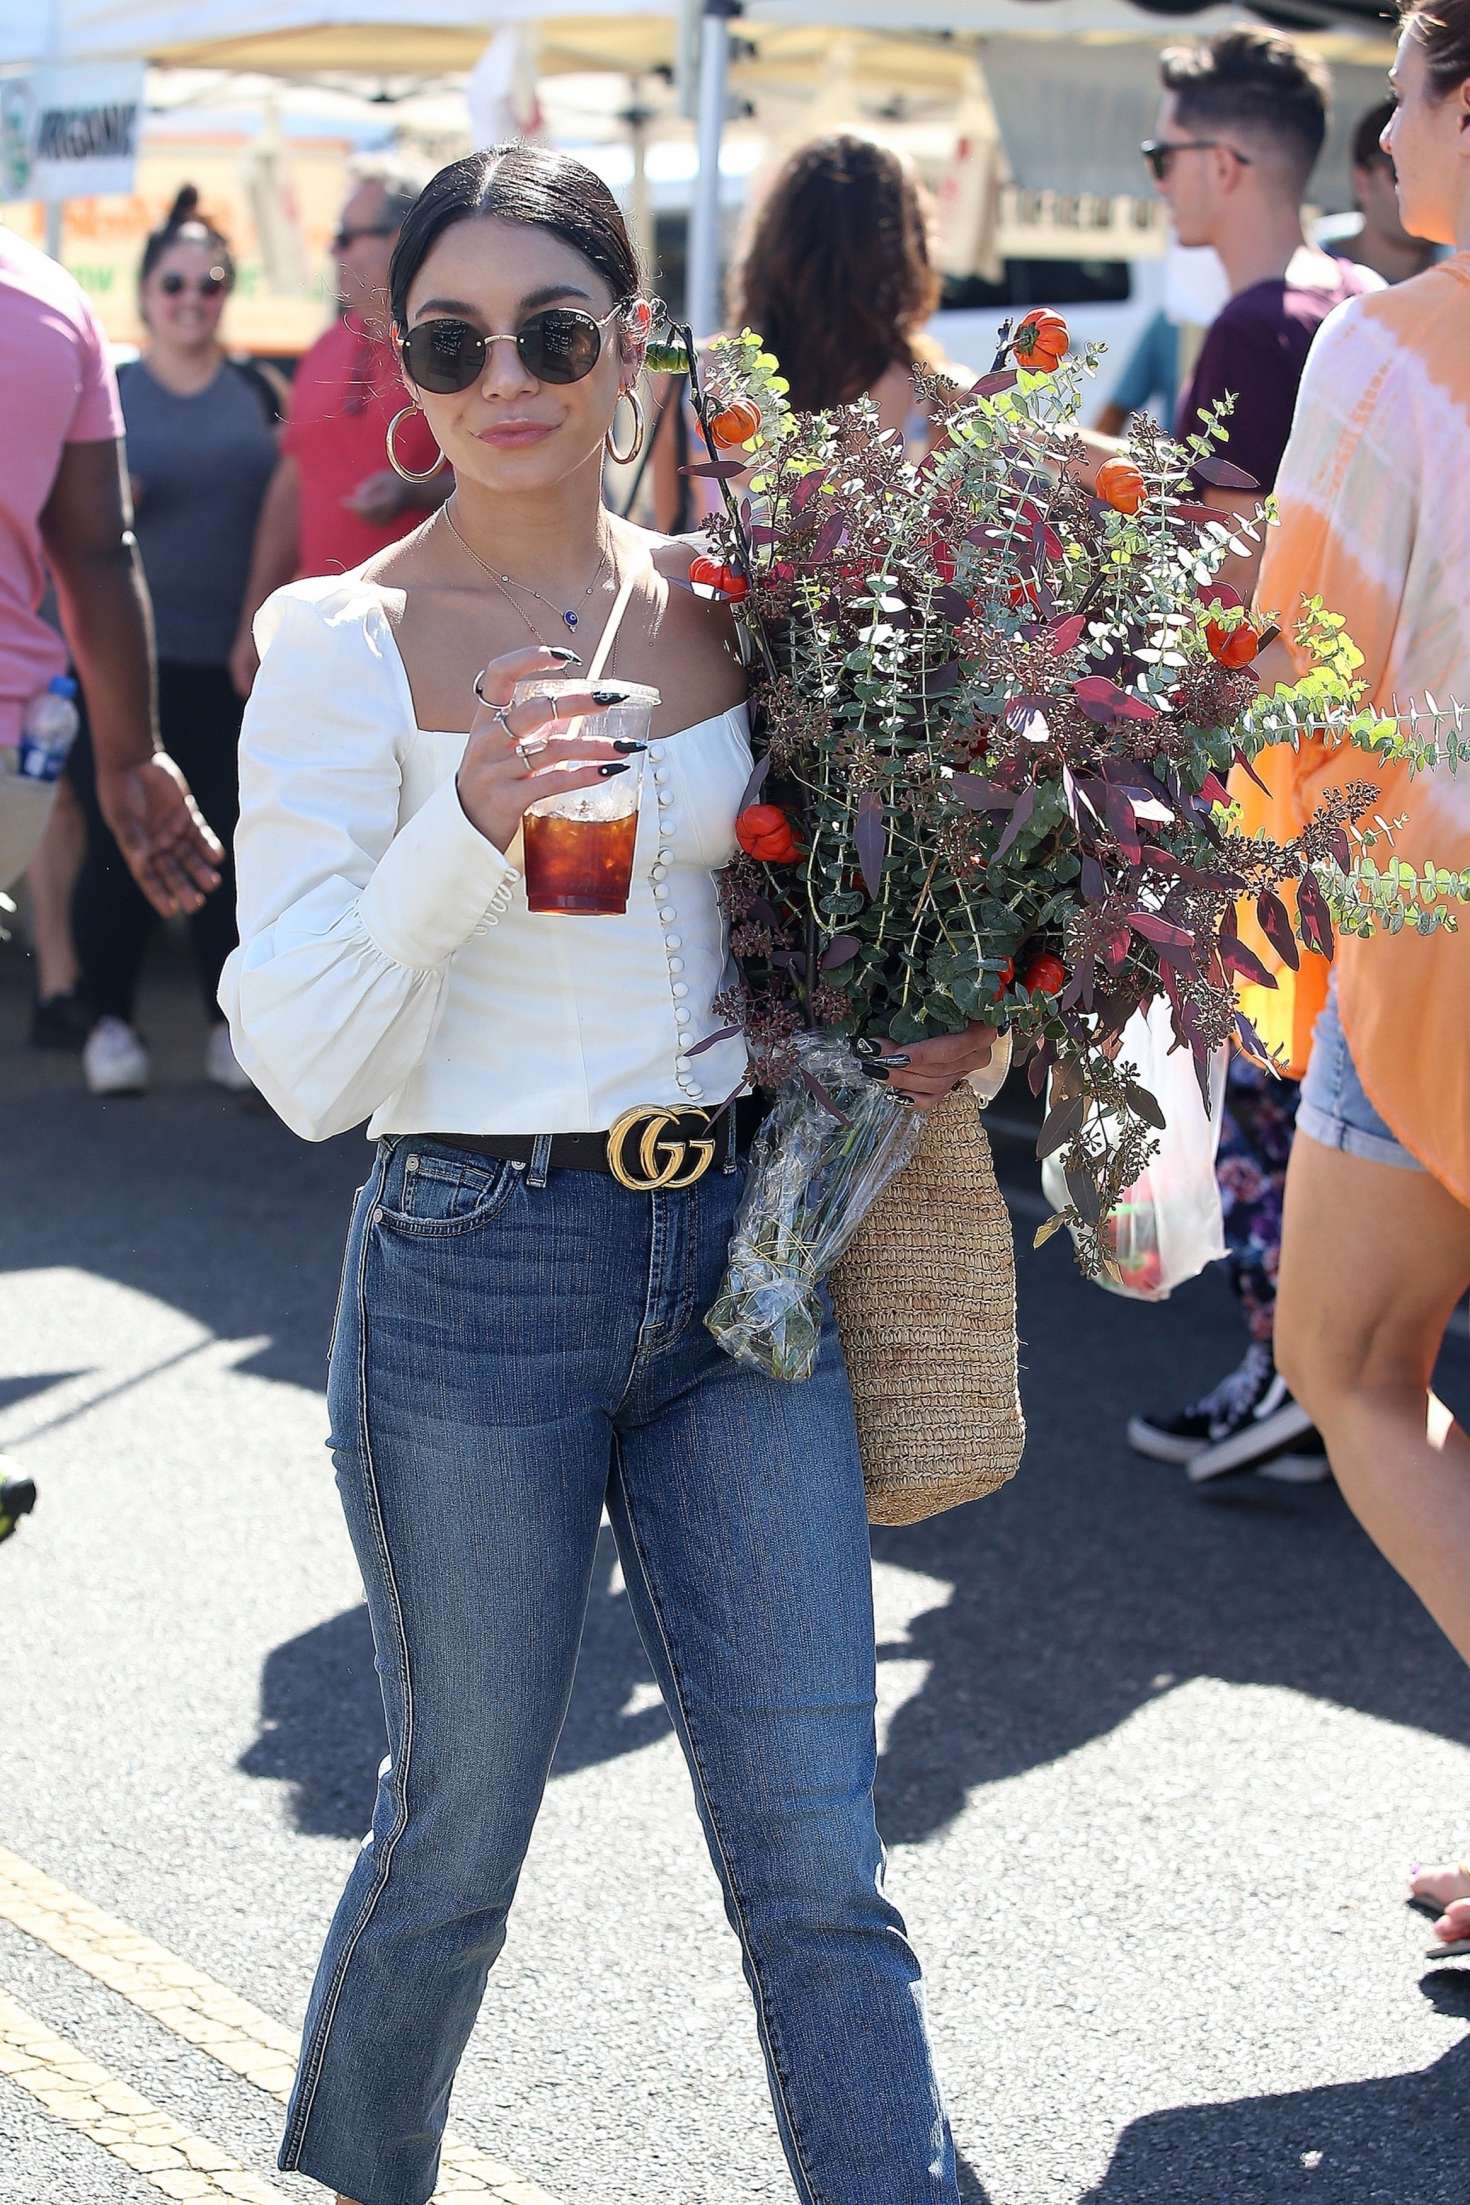 Vanessa Hudgens â€“ Shopping for flowers at the Farmers Market in Studio City